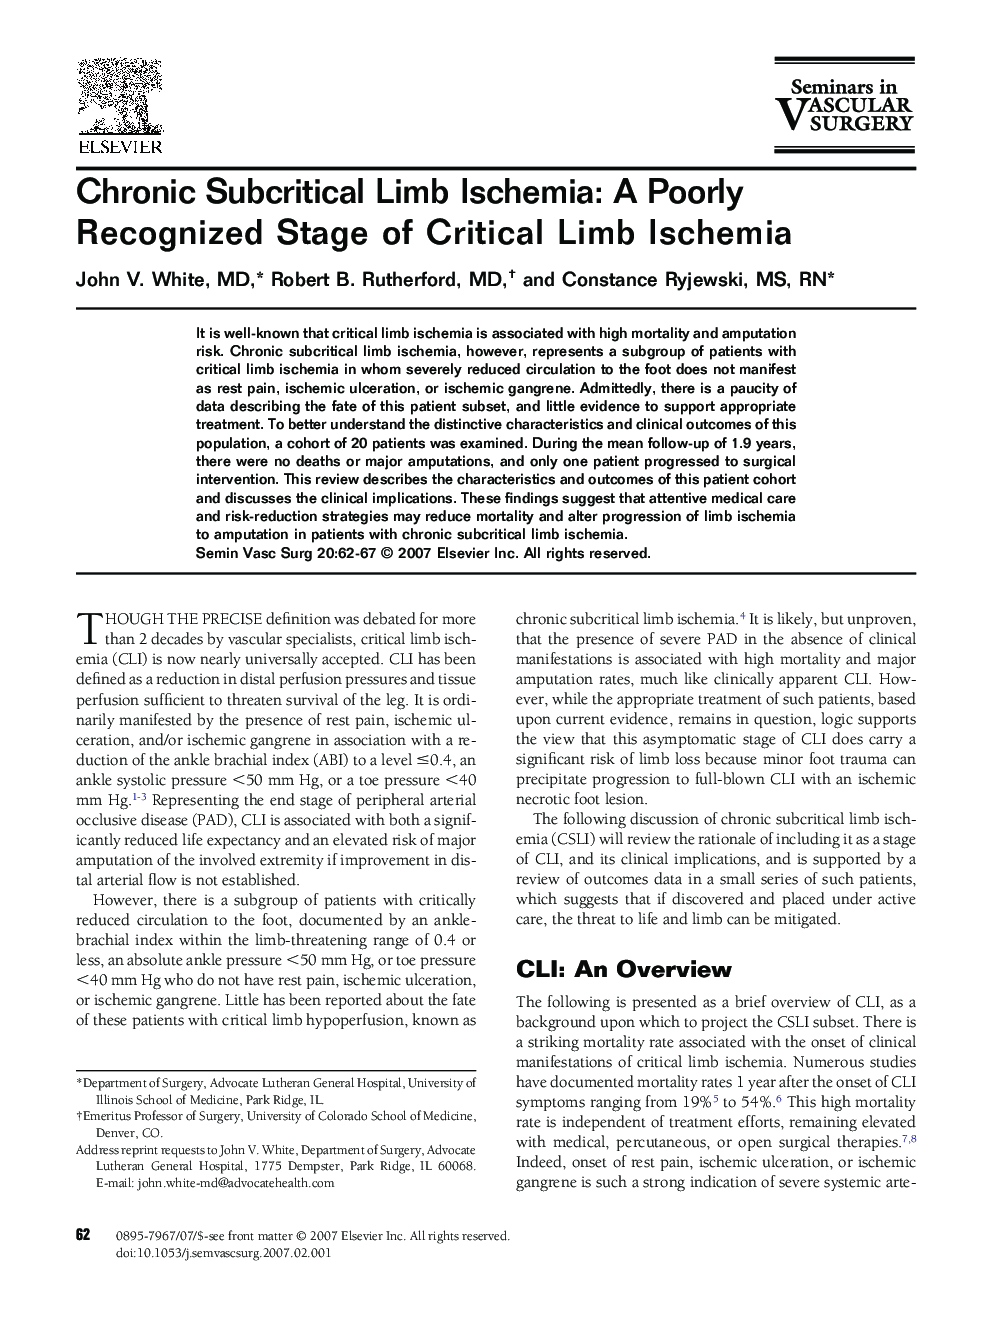 Chronic Subcritical Limb Ischemia: A Poorly Recognized Stage of Critical Limb Ischemia